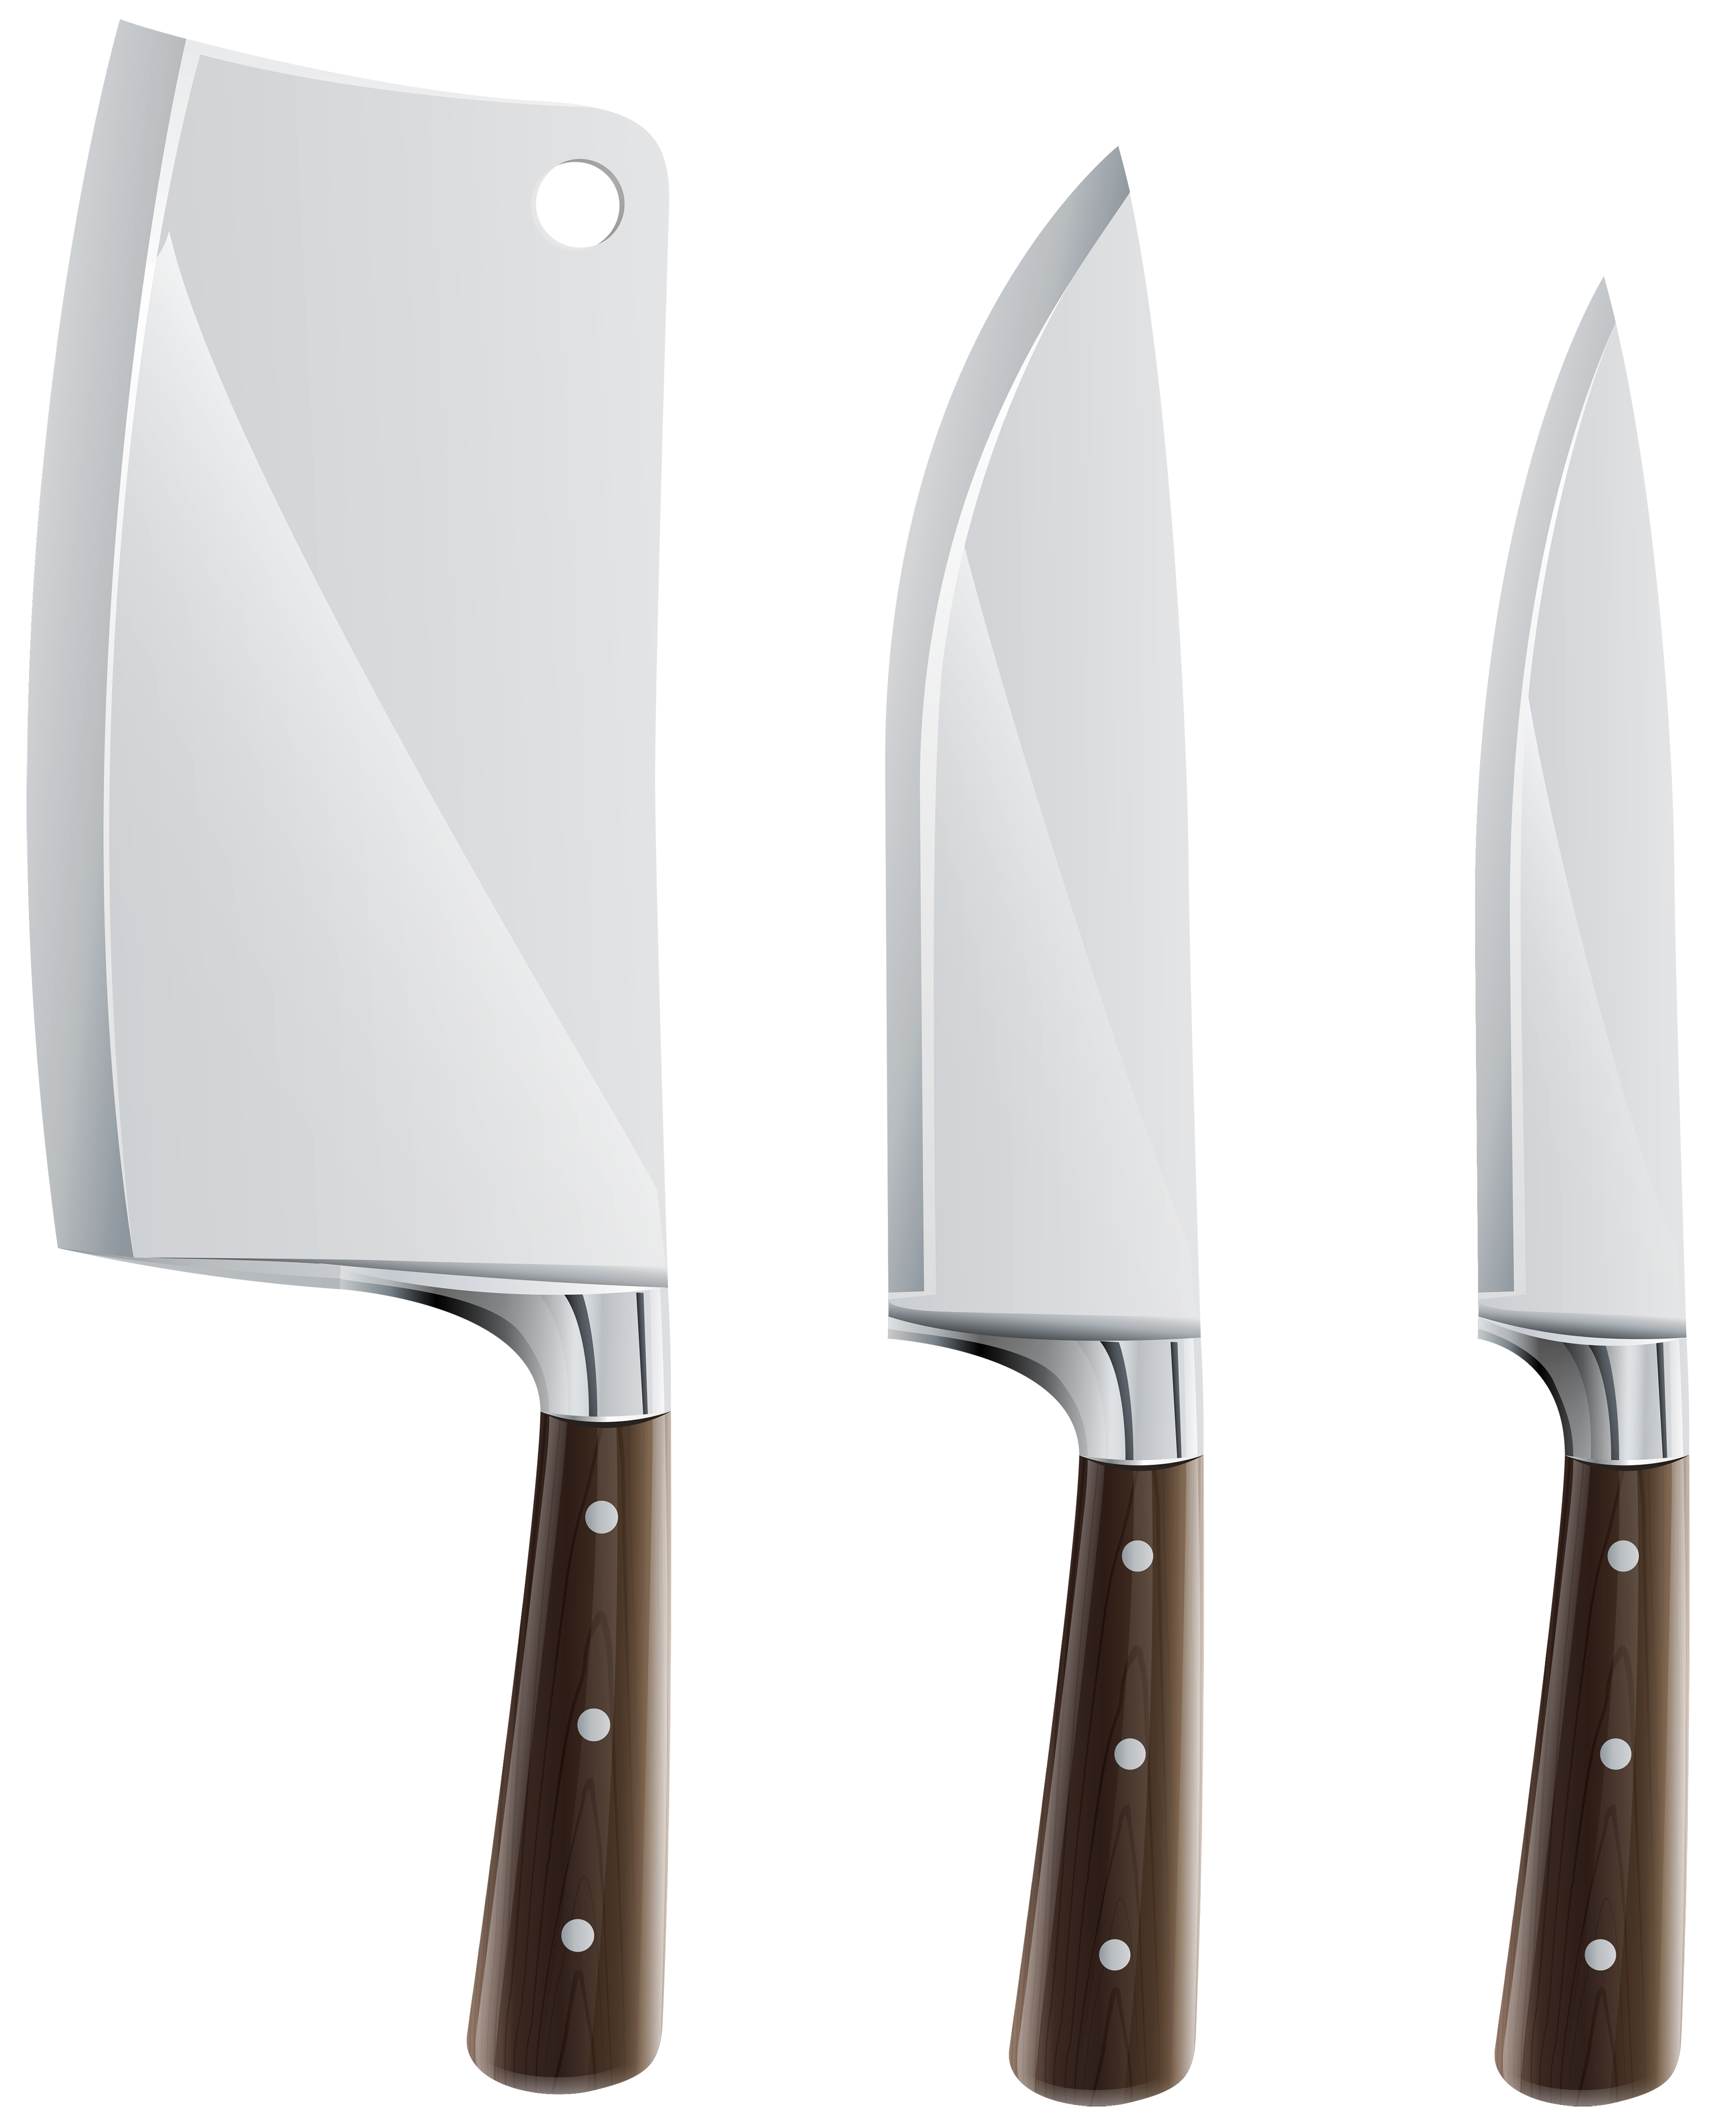 clipart pictures of knives - photo #40